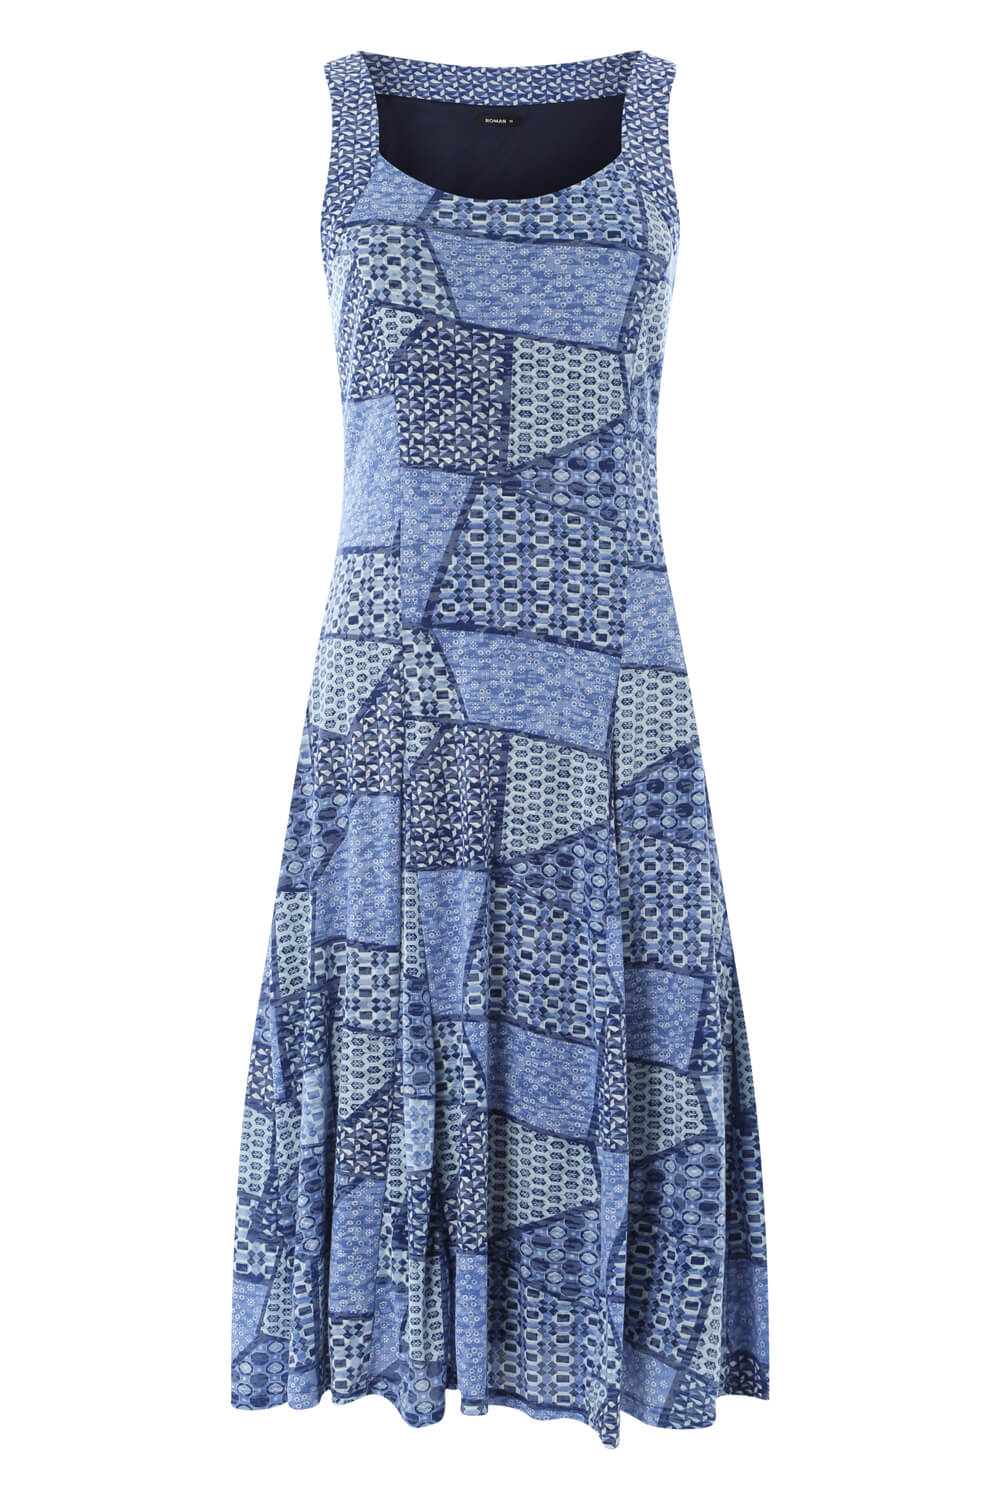 Blue Geo Print Fit and Flare Dress, Image 4 of 4